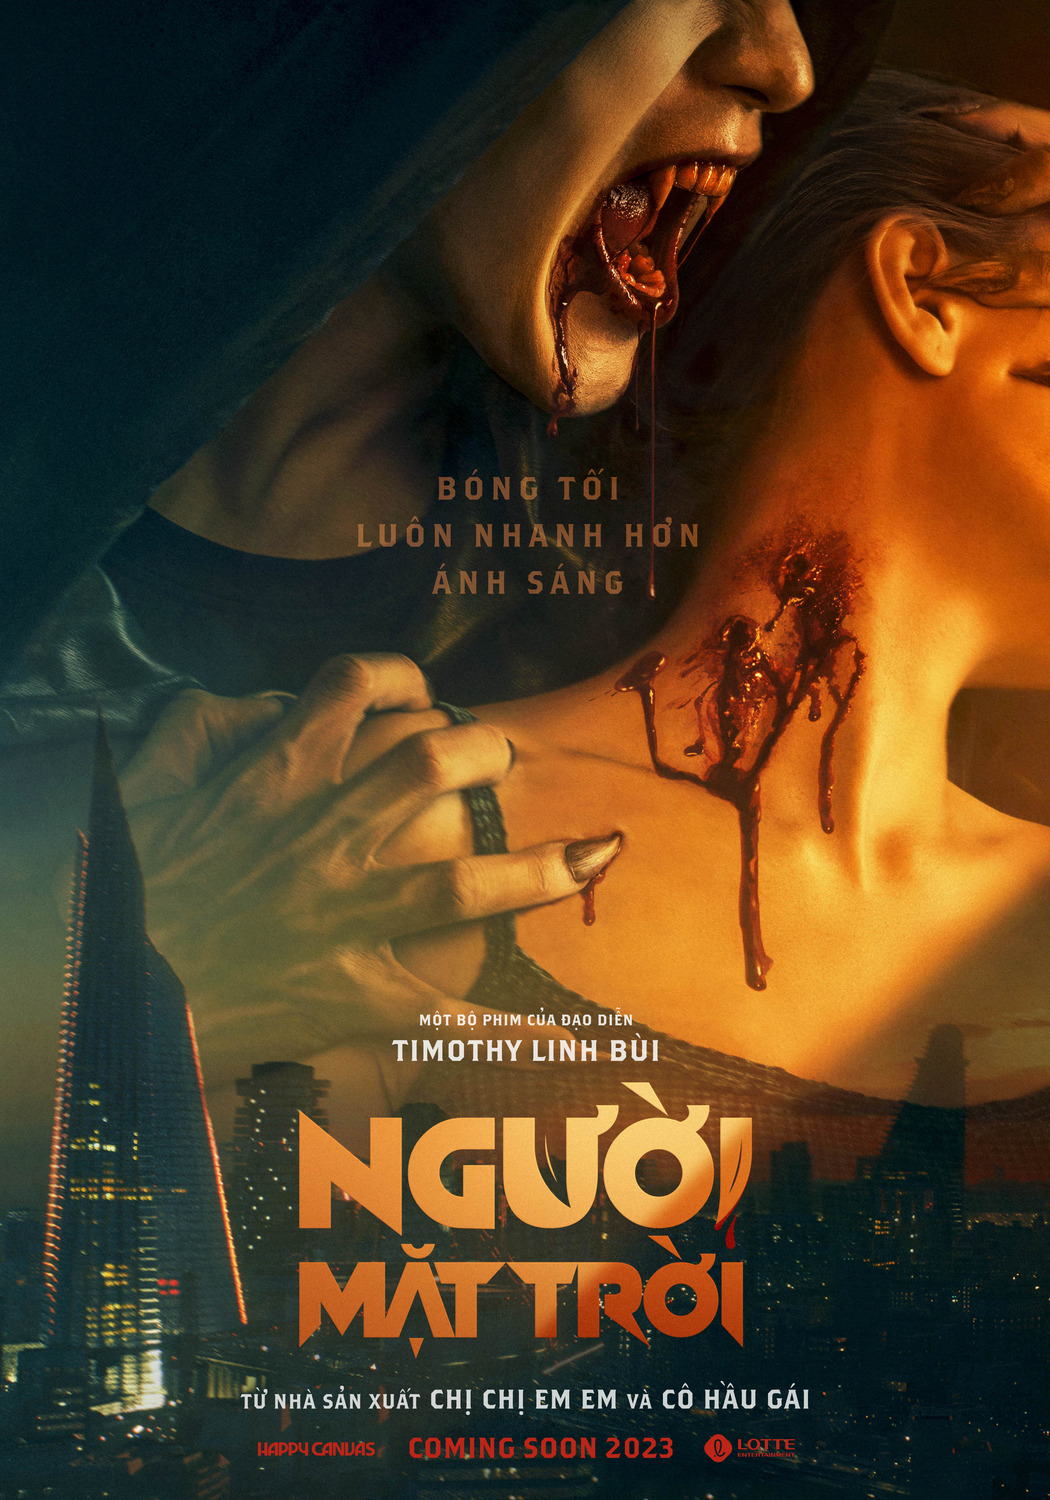 Extra Large Movie Poster Image for Người Mặt Trời 